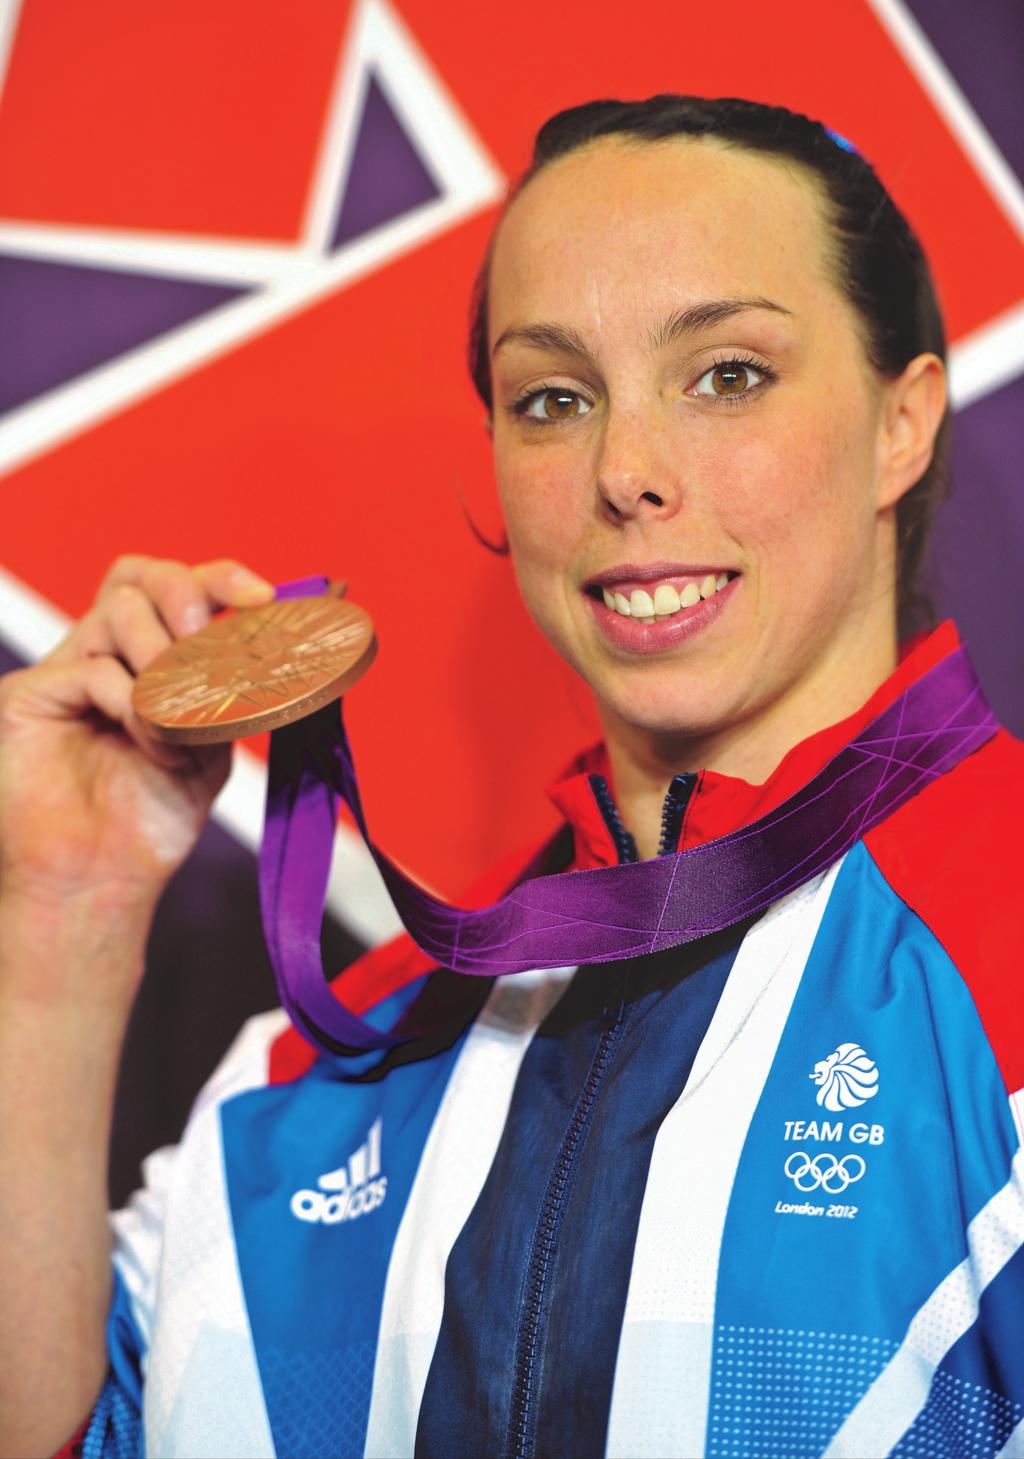 WOMEN S UNEVEN BARS: 6 AUG 2012 Beth Tweddle s bronze medal was a fitting reward for such a great servant to British sport.